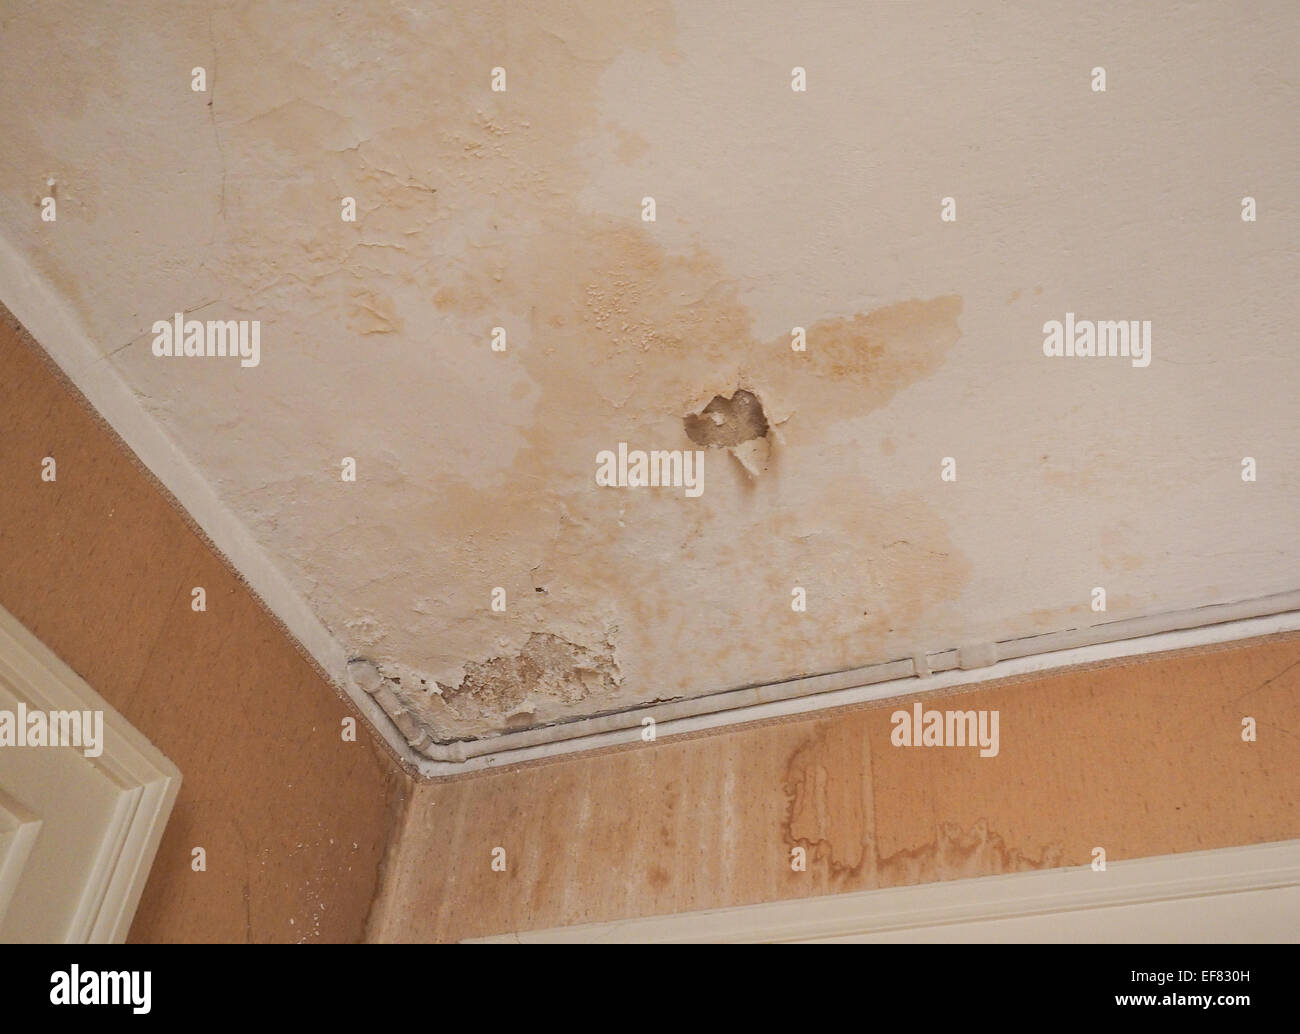 Damage Caused By Damp And Moisture On A Ceiling Stock Photo